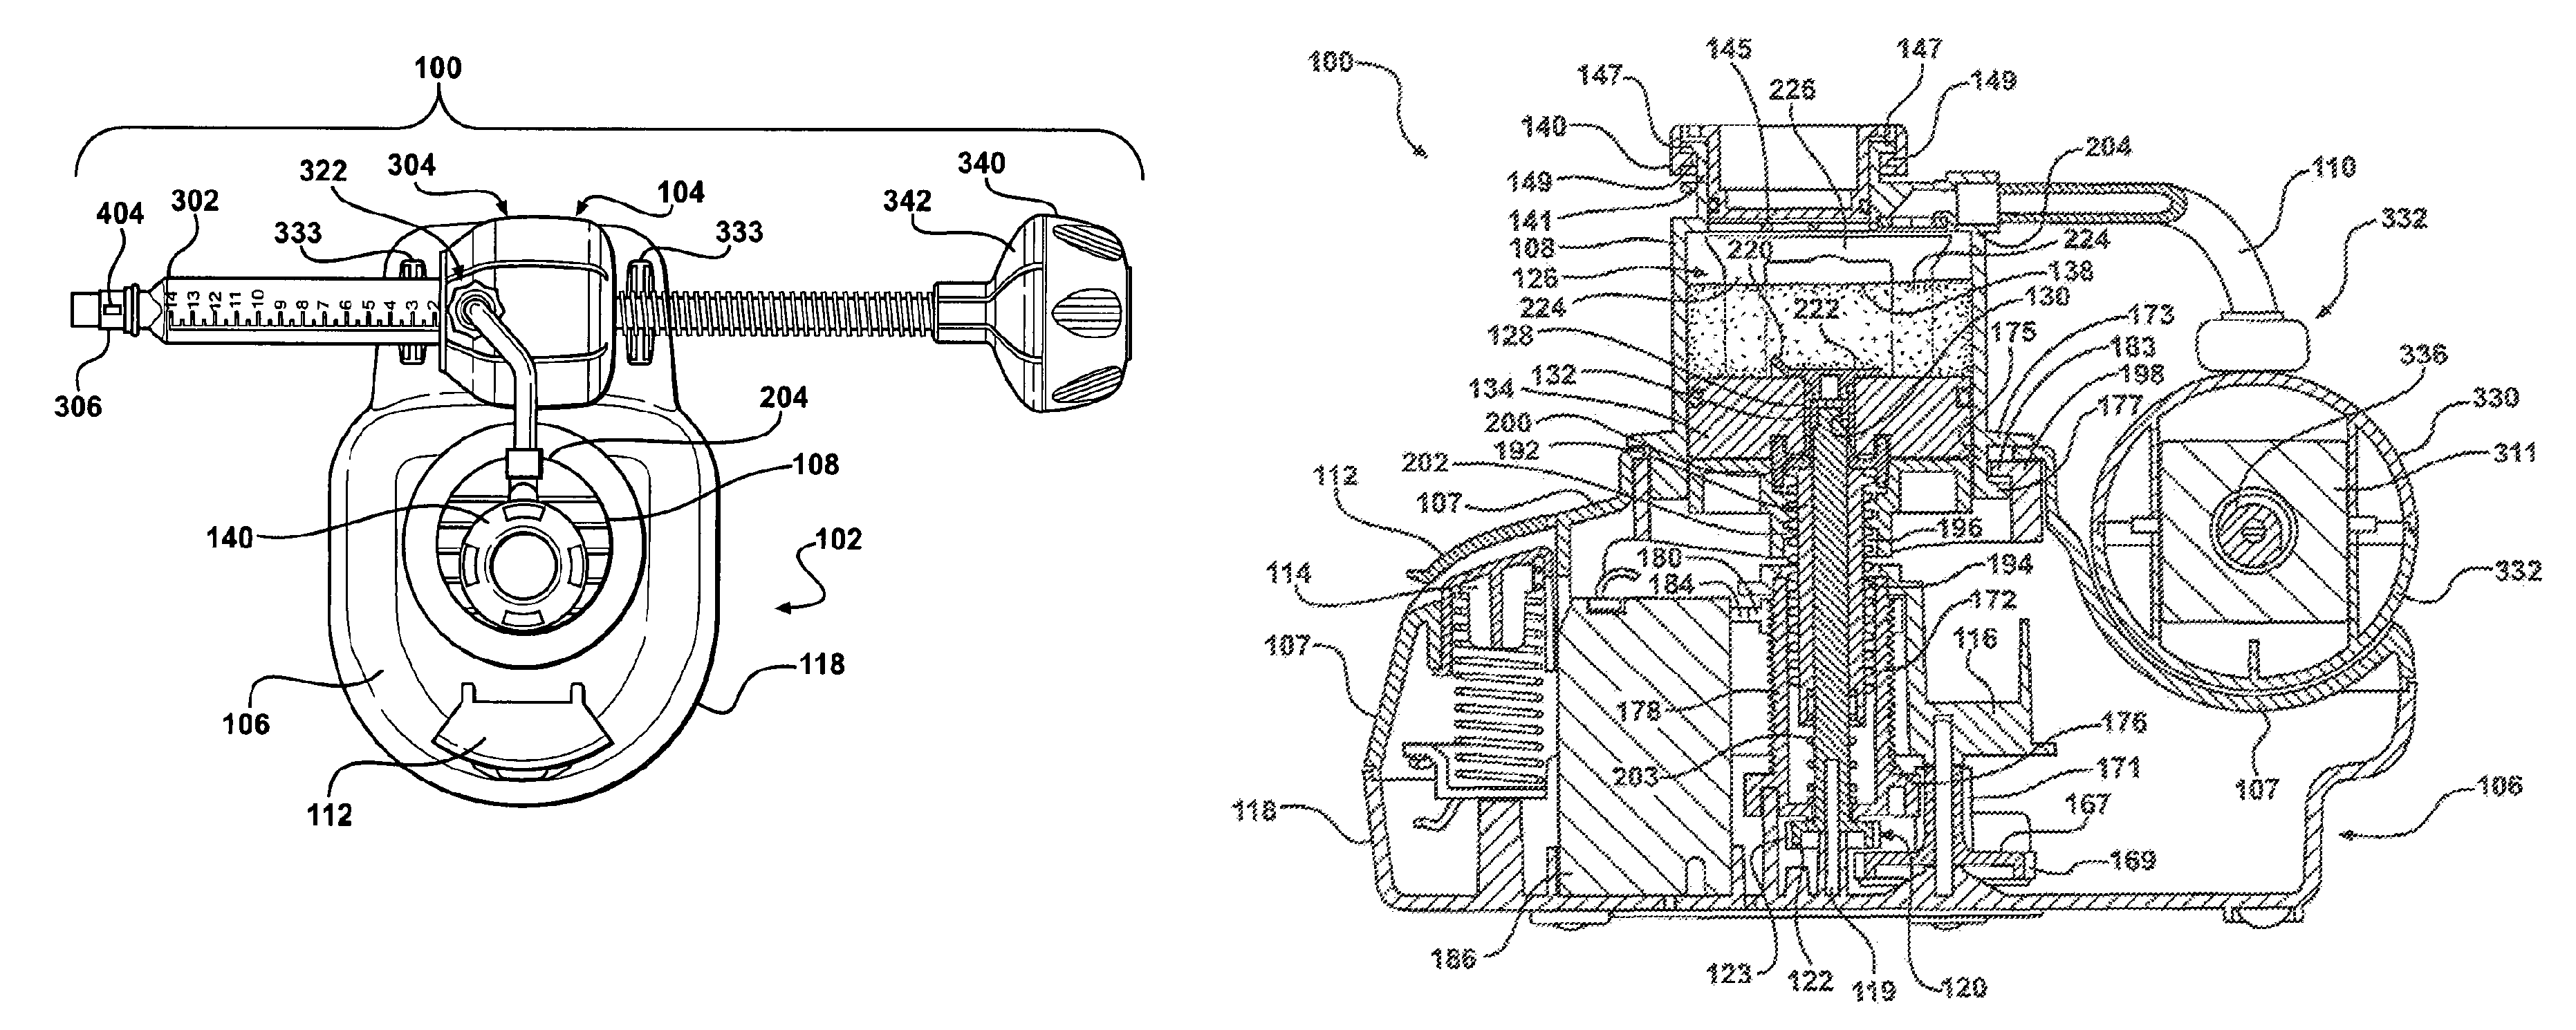 Bone cement mixing and delivery system with automated bone cement transfer between mixer and delivery device